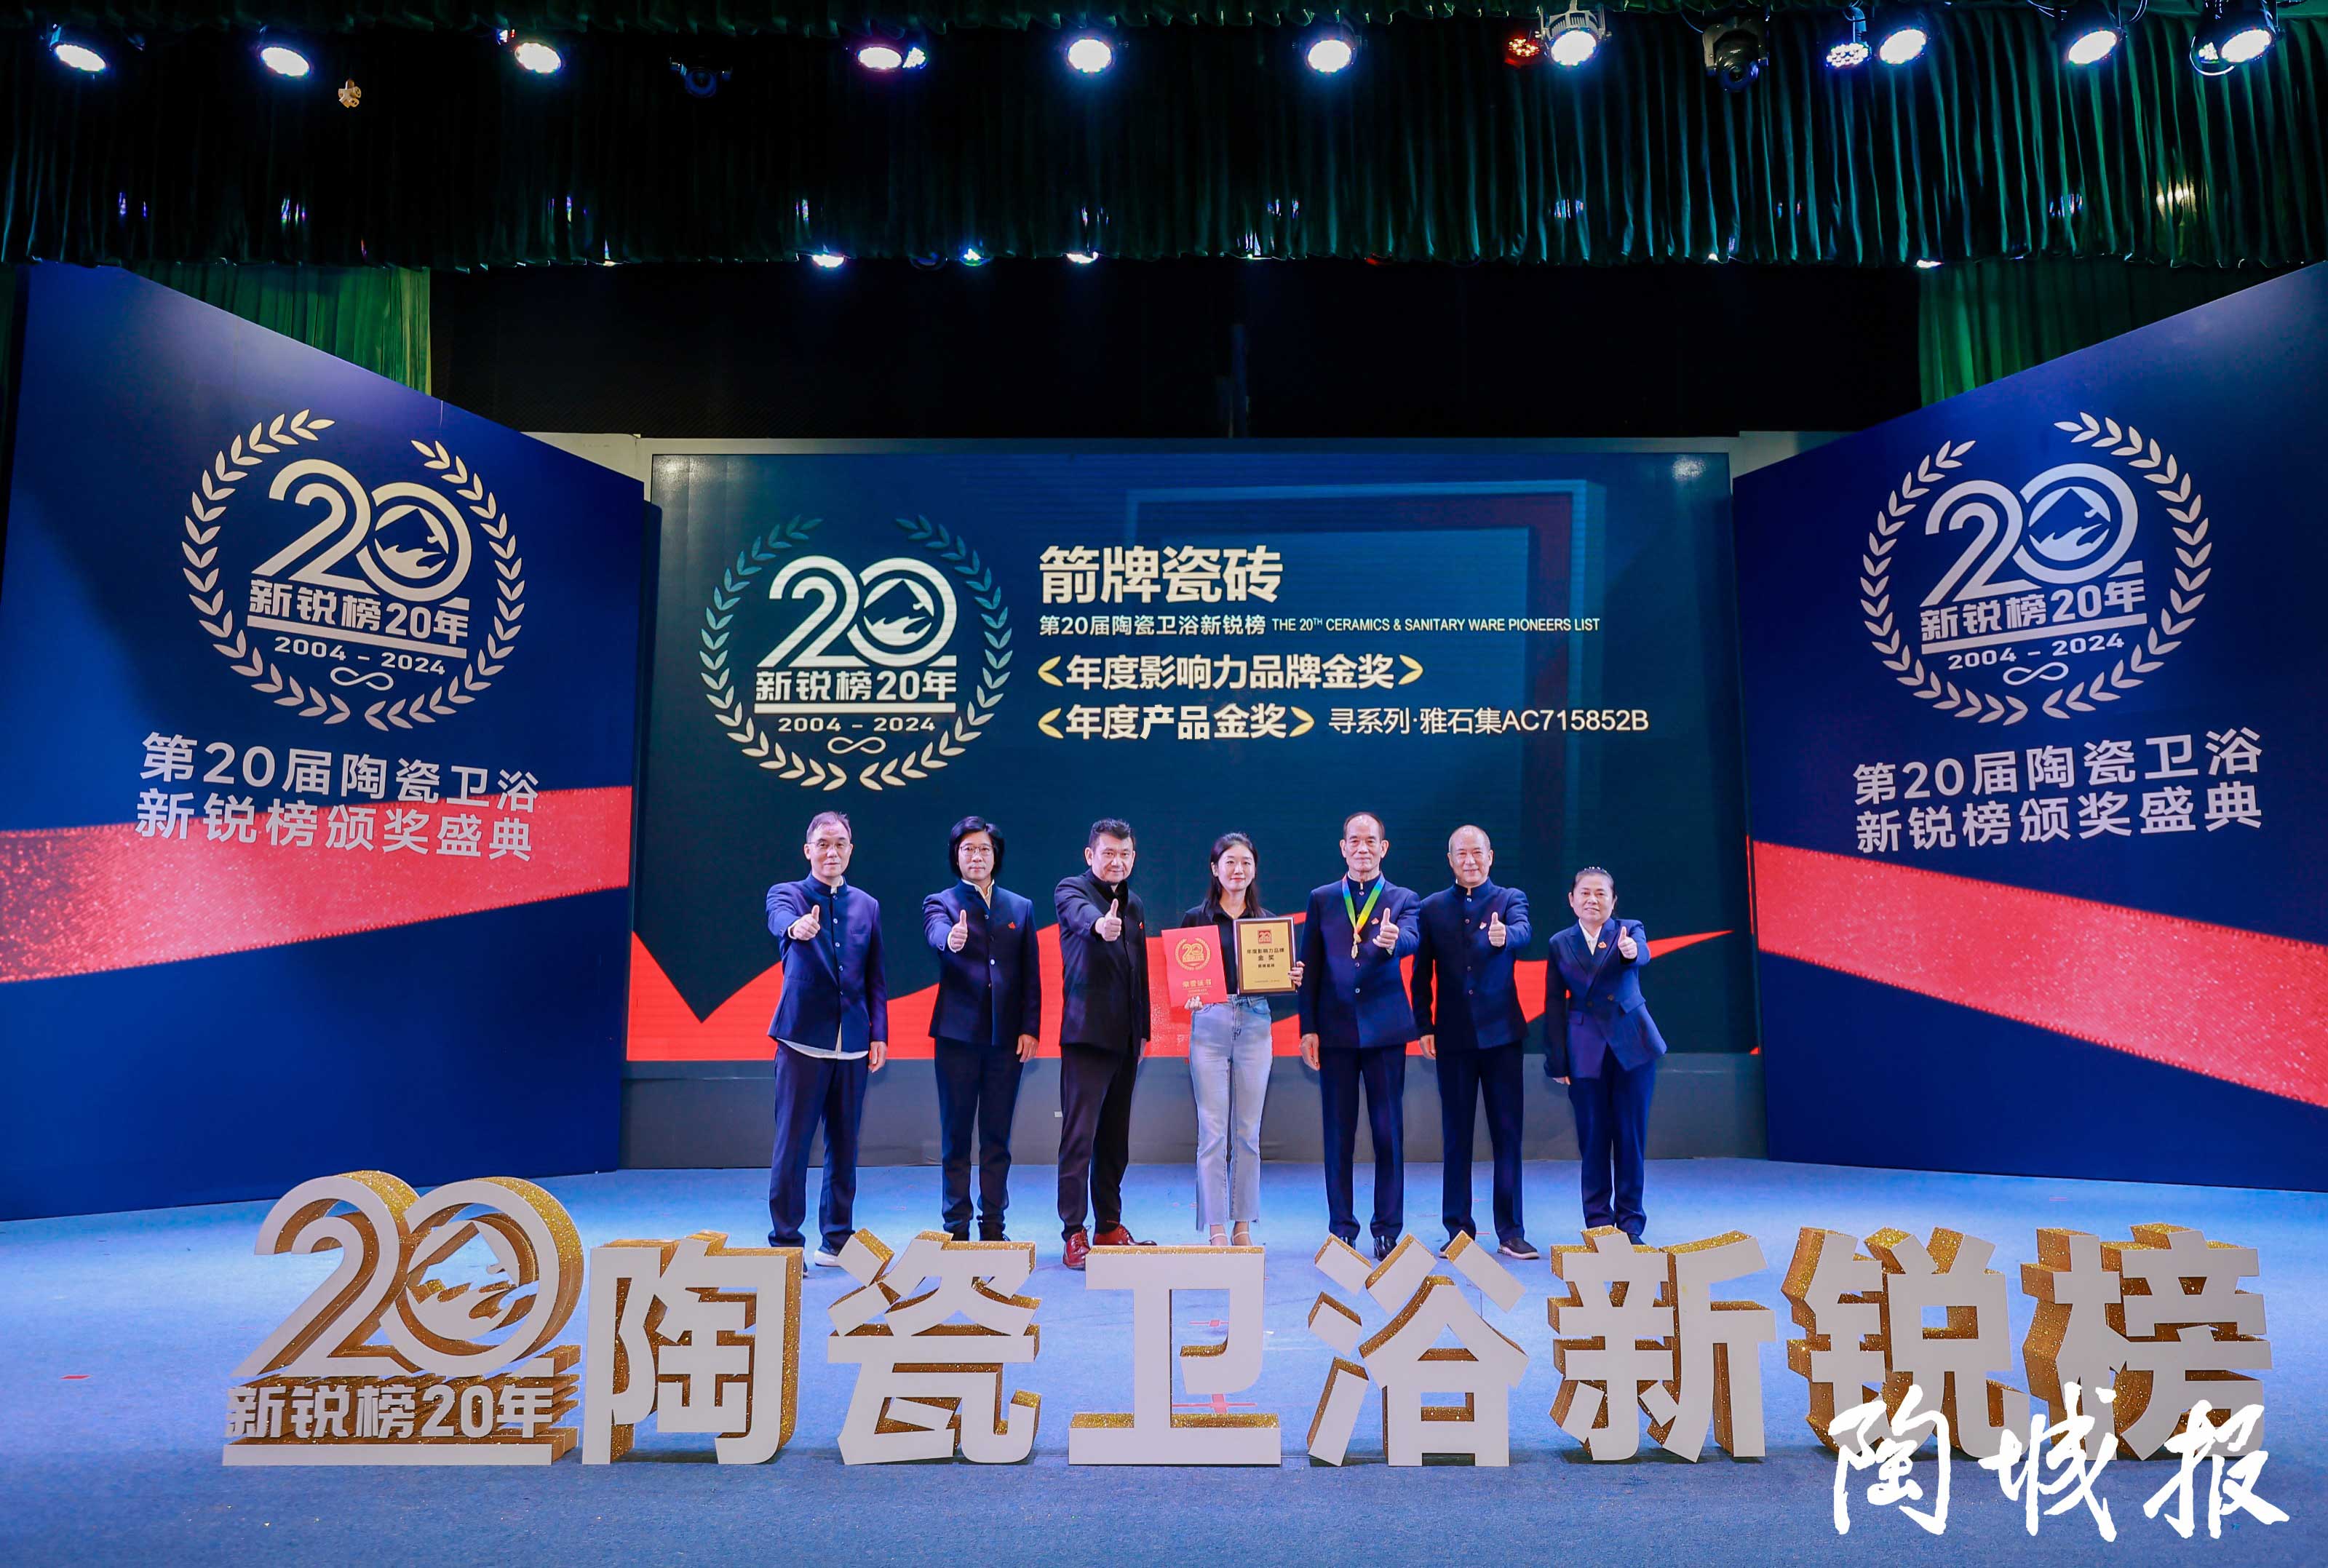  On May 30, the awarding ceremony of the 20th China Sanitary Ware New Talent List was held. This year, Wrigley Tiles has made persistent efforts to stand out from hundreds of enterprises participating in the evaluation and won the "Gold Award of Annual Influential Brand" and "Gold Award of Annual Product"